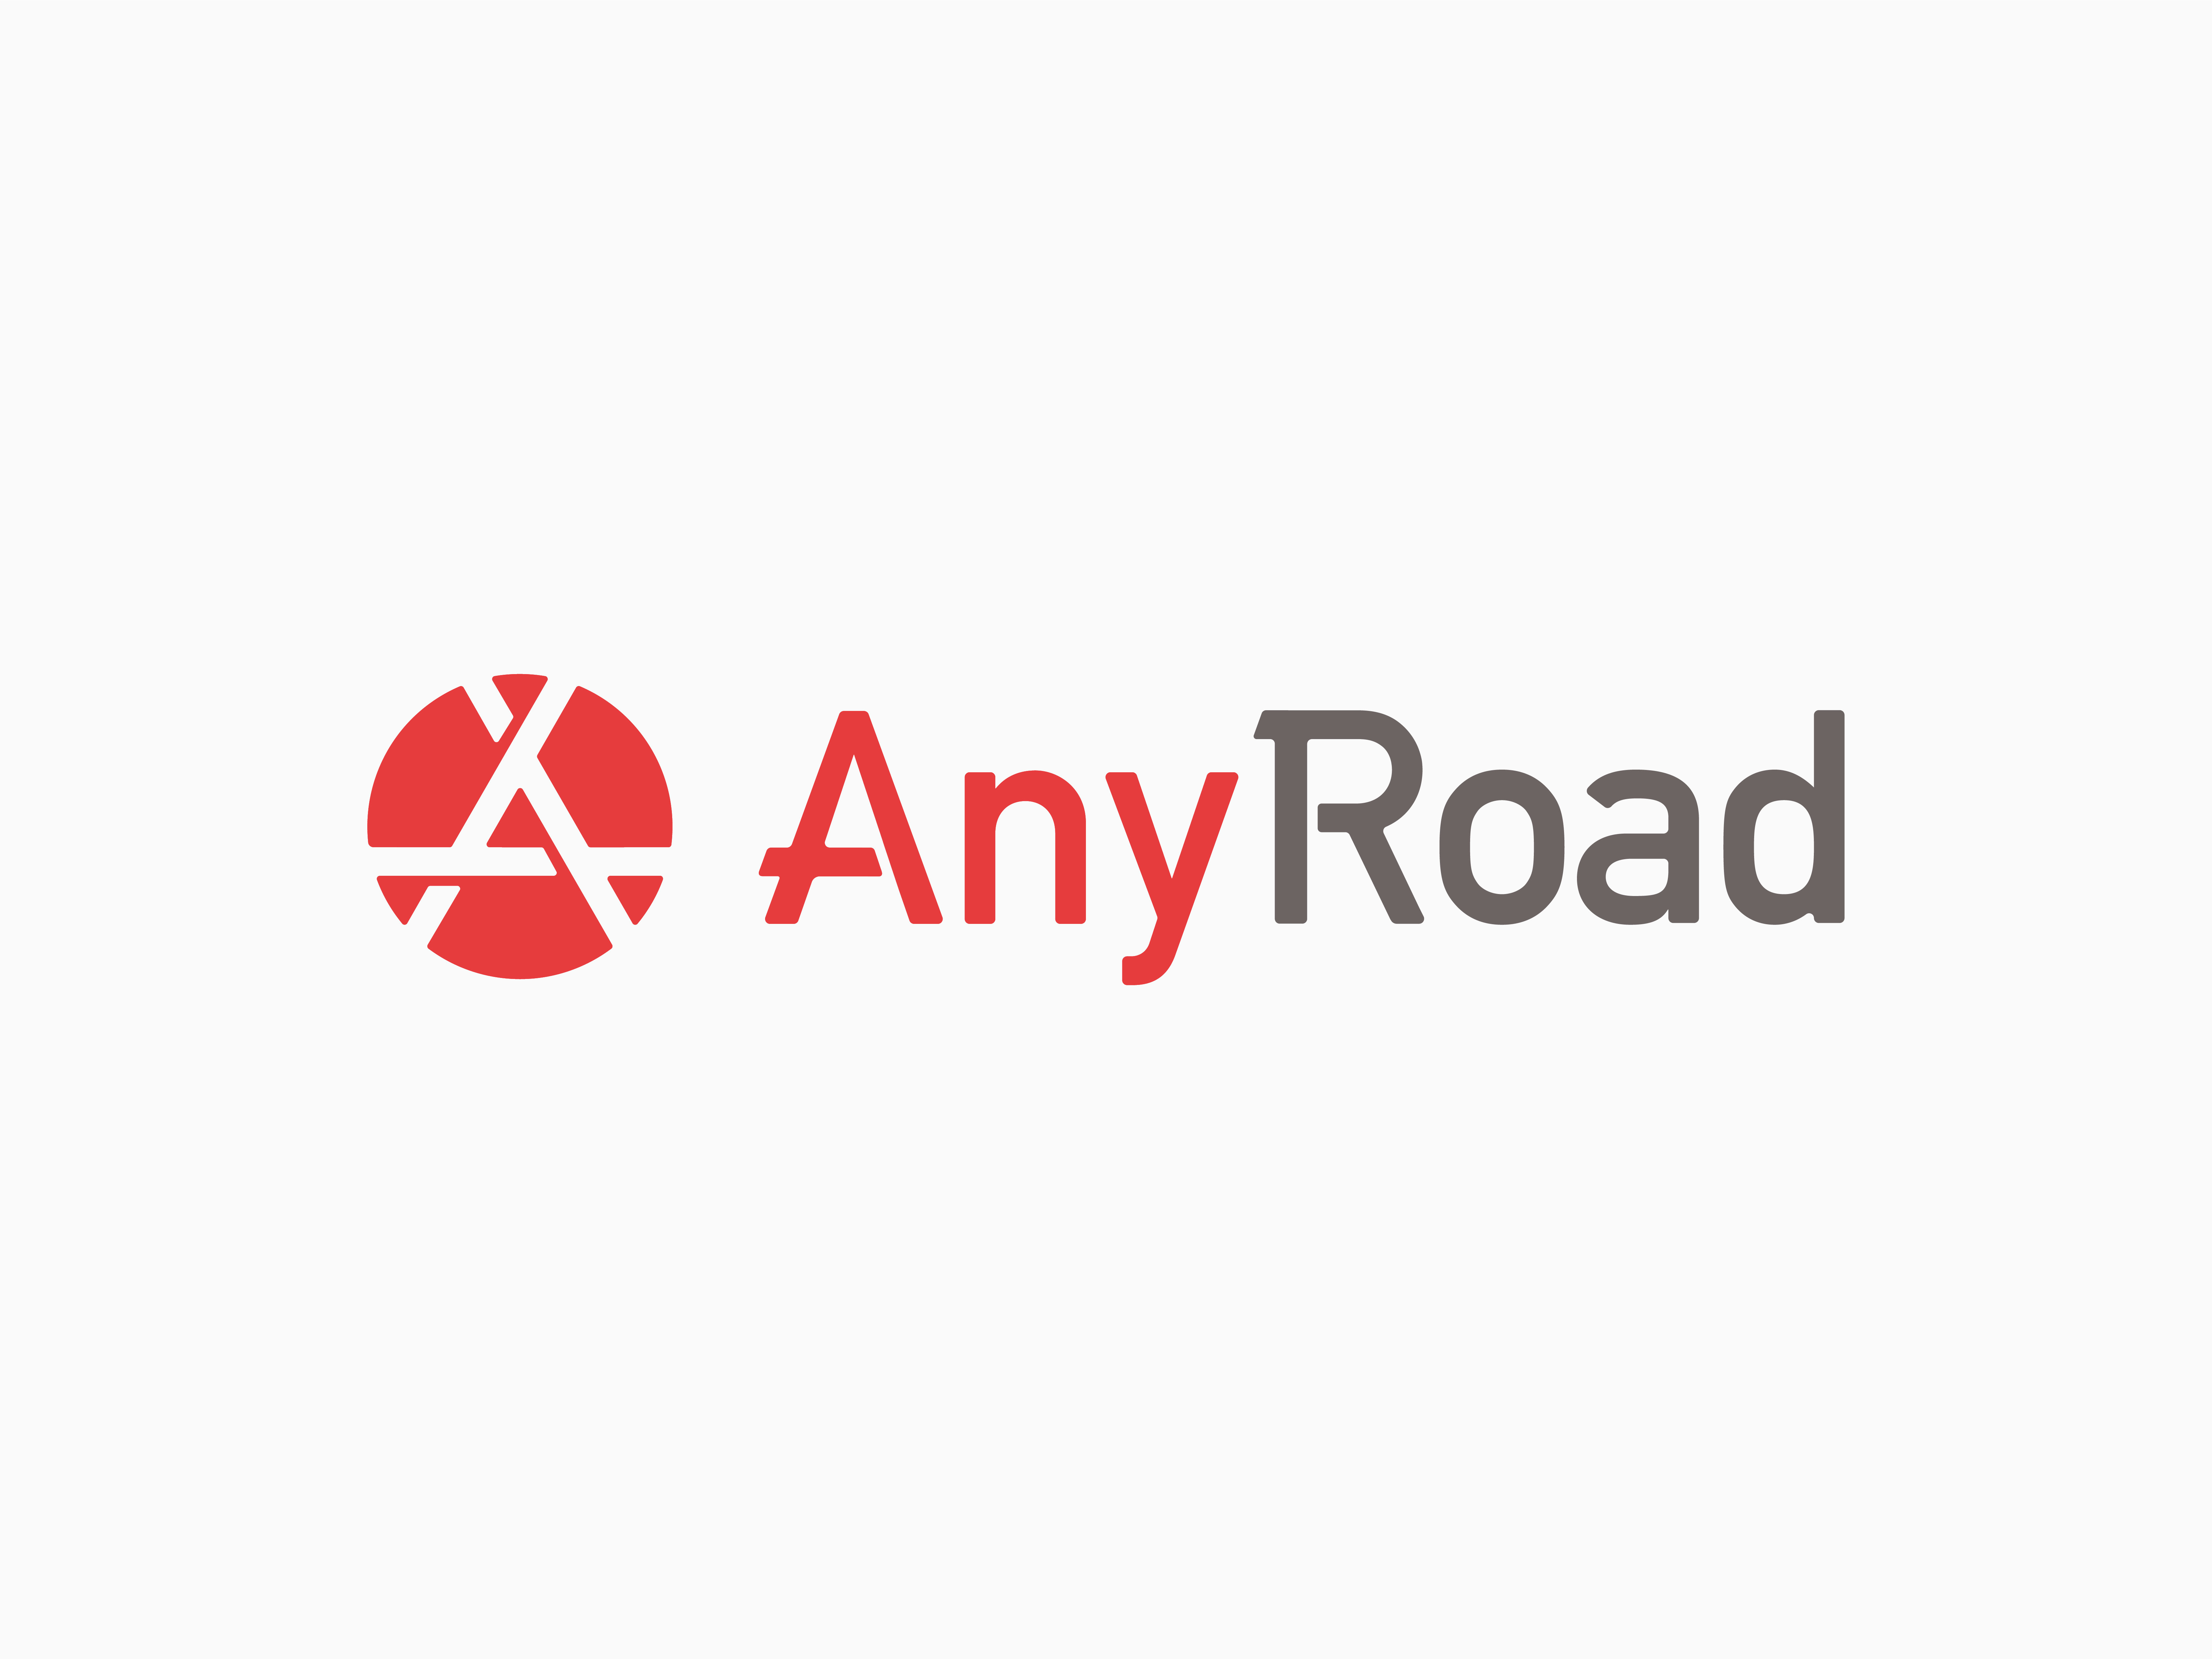 AnyRoad Branding & Strategy